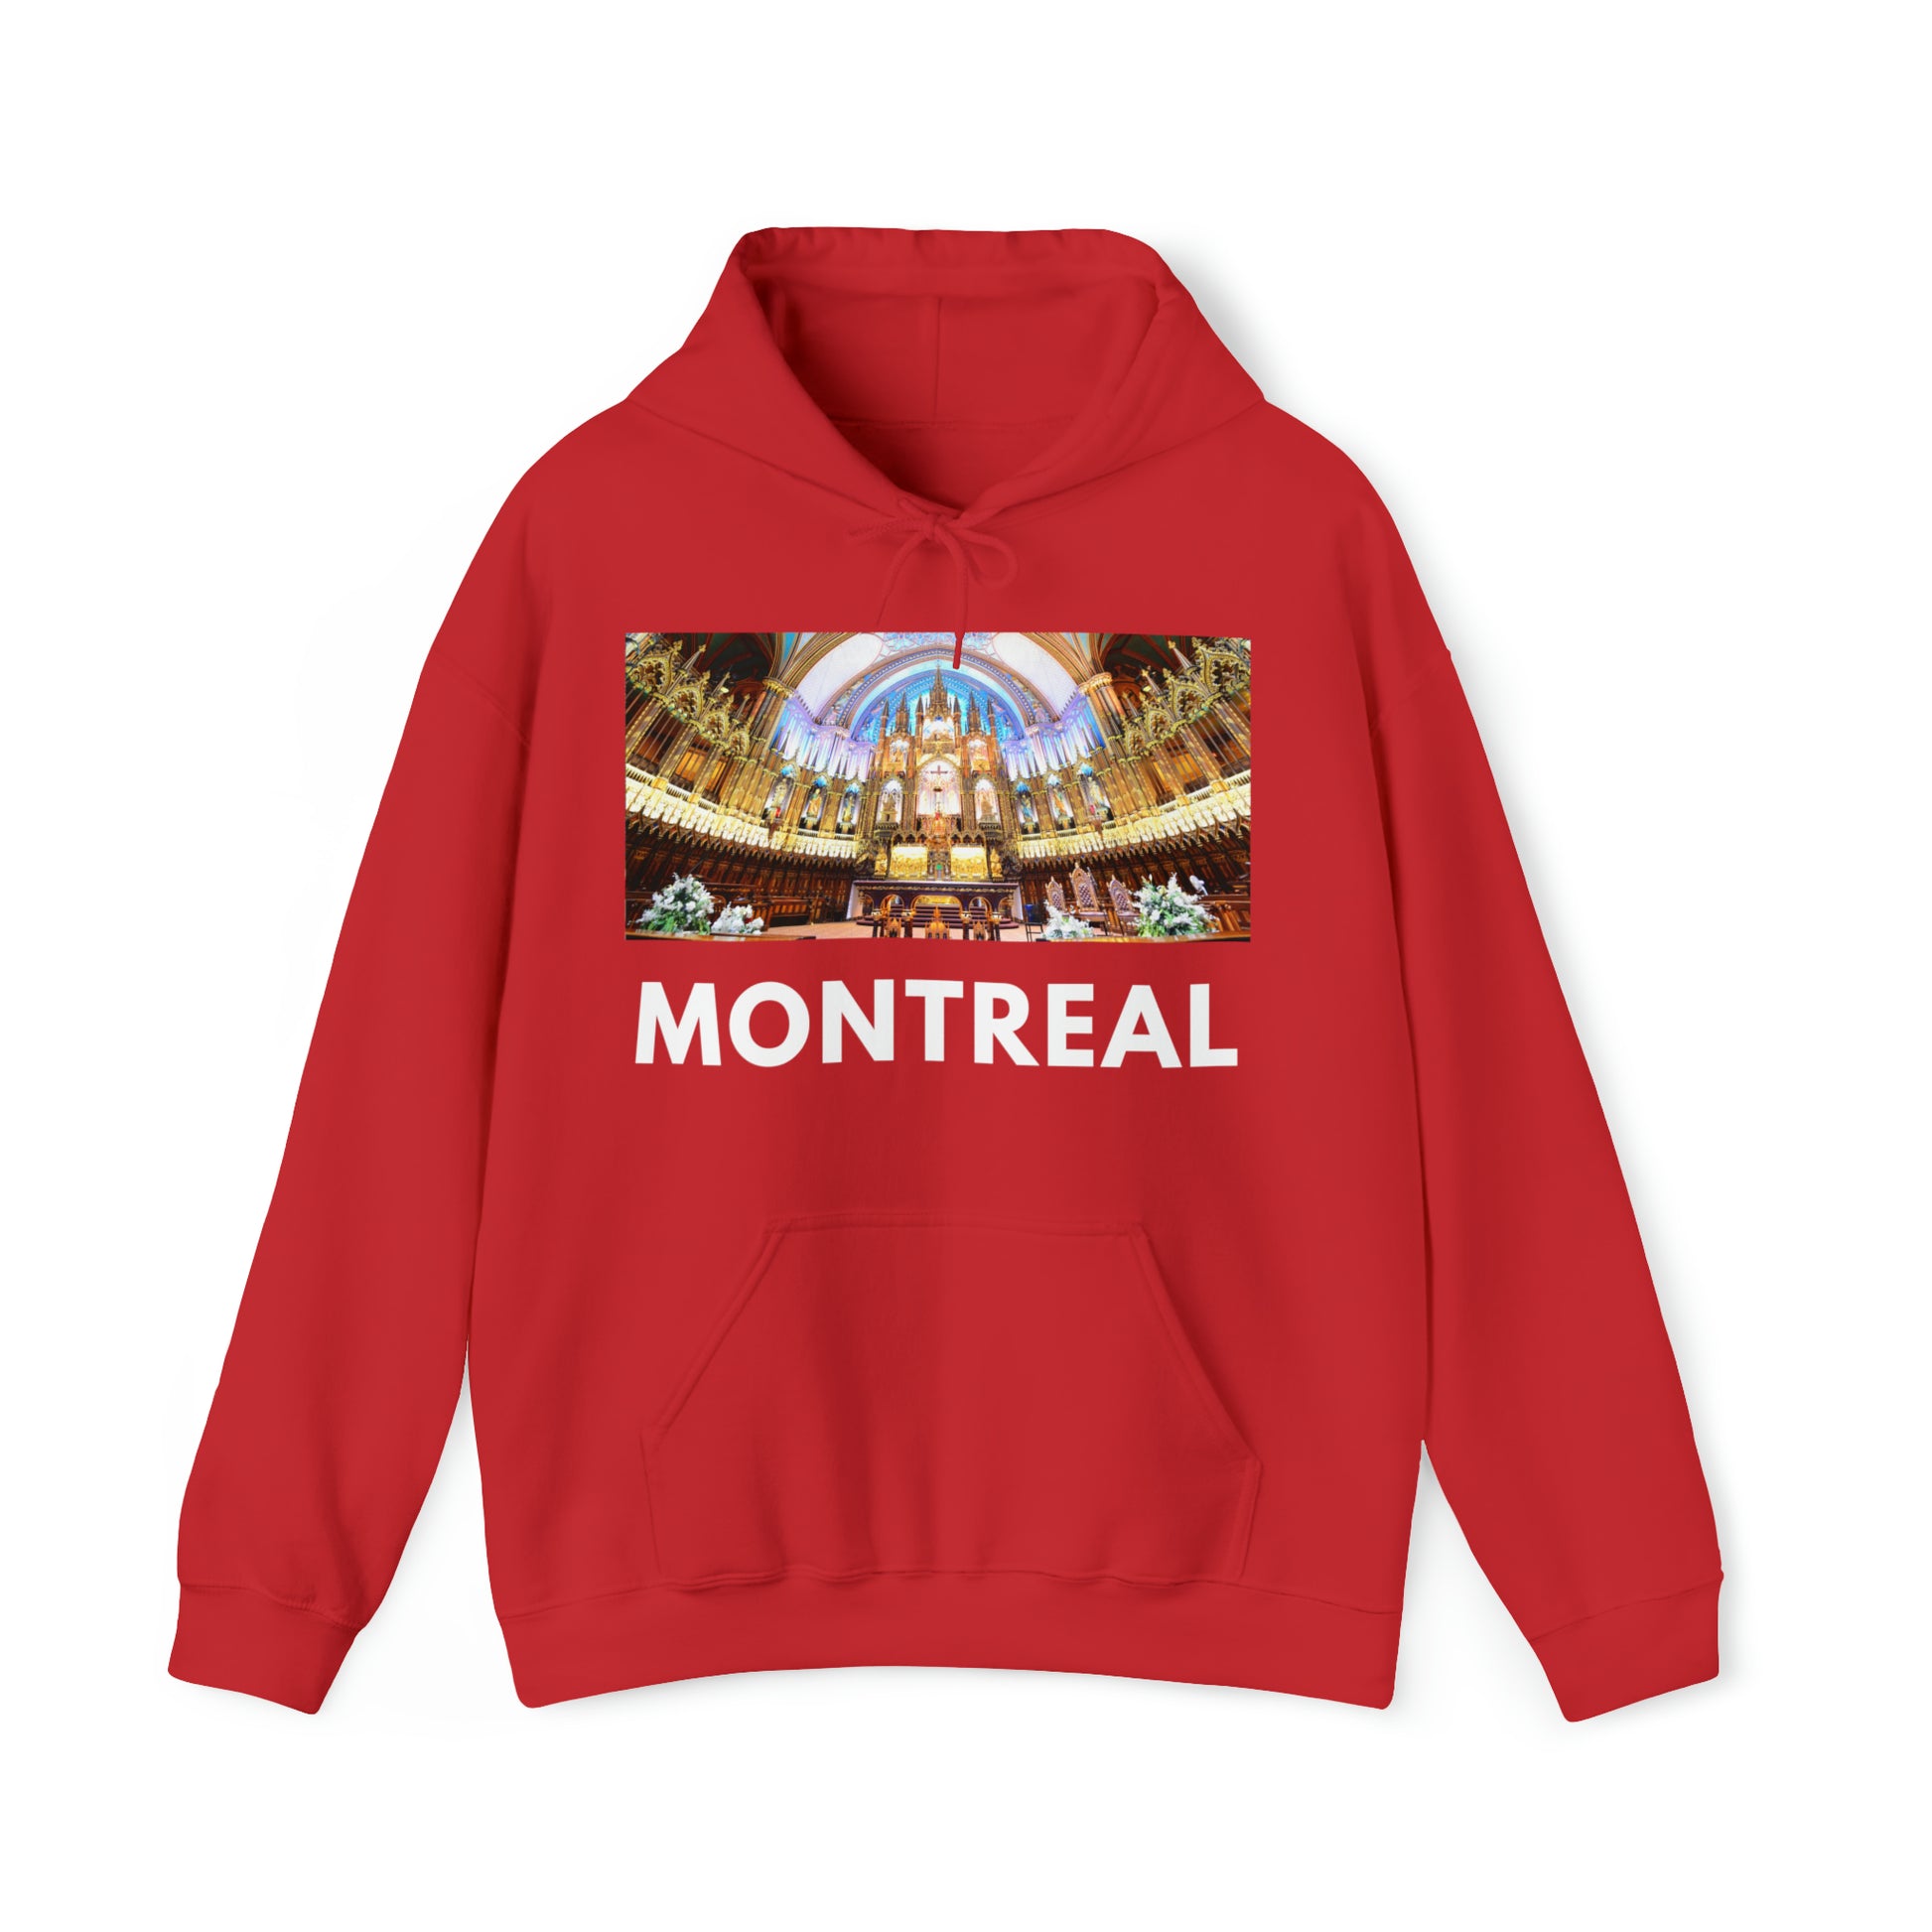 S Red Montreal Hoodie: Notre Dame from HoodySZN.com